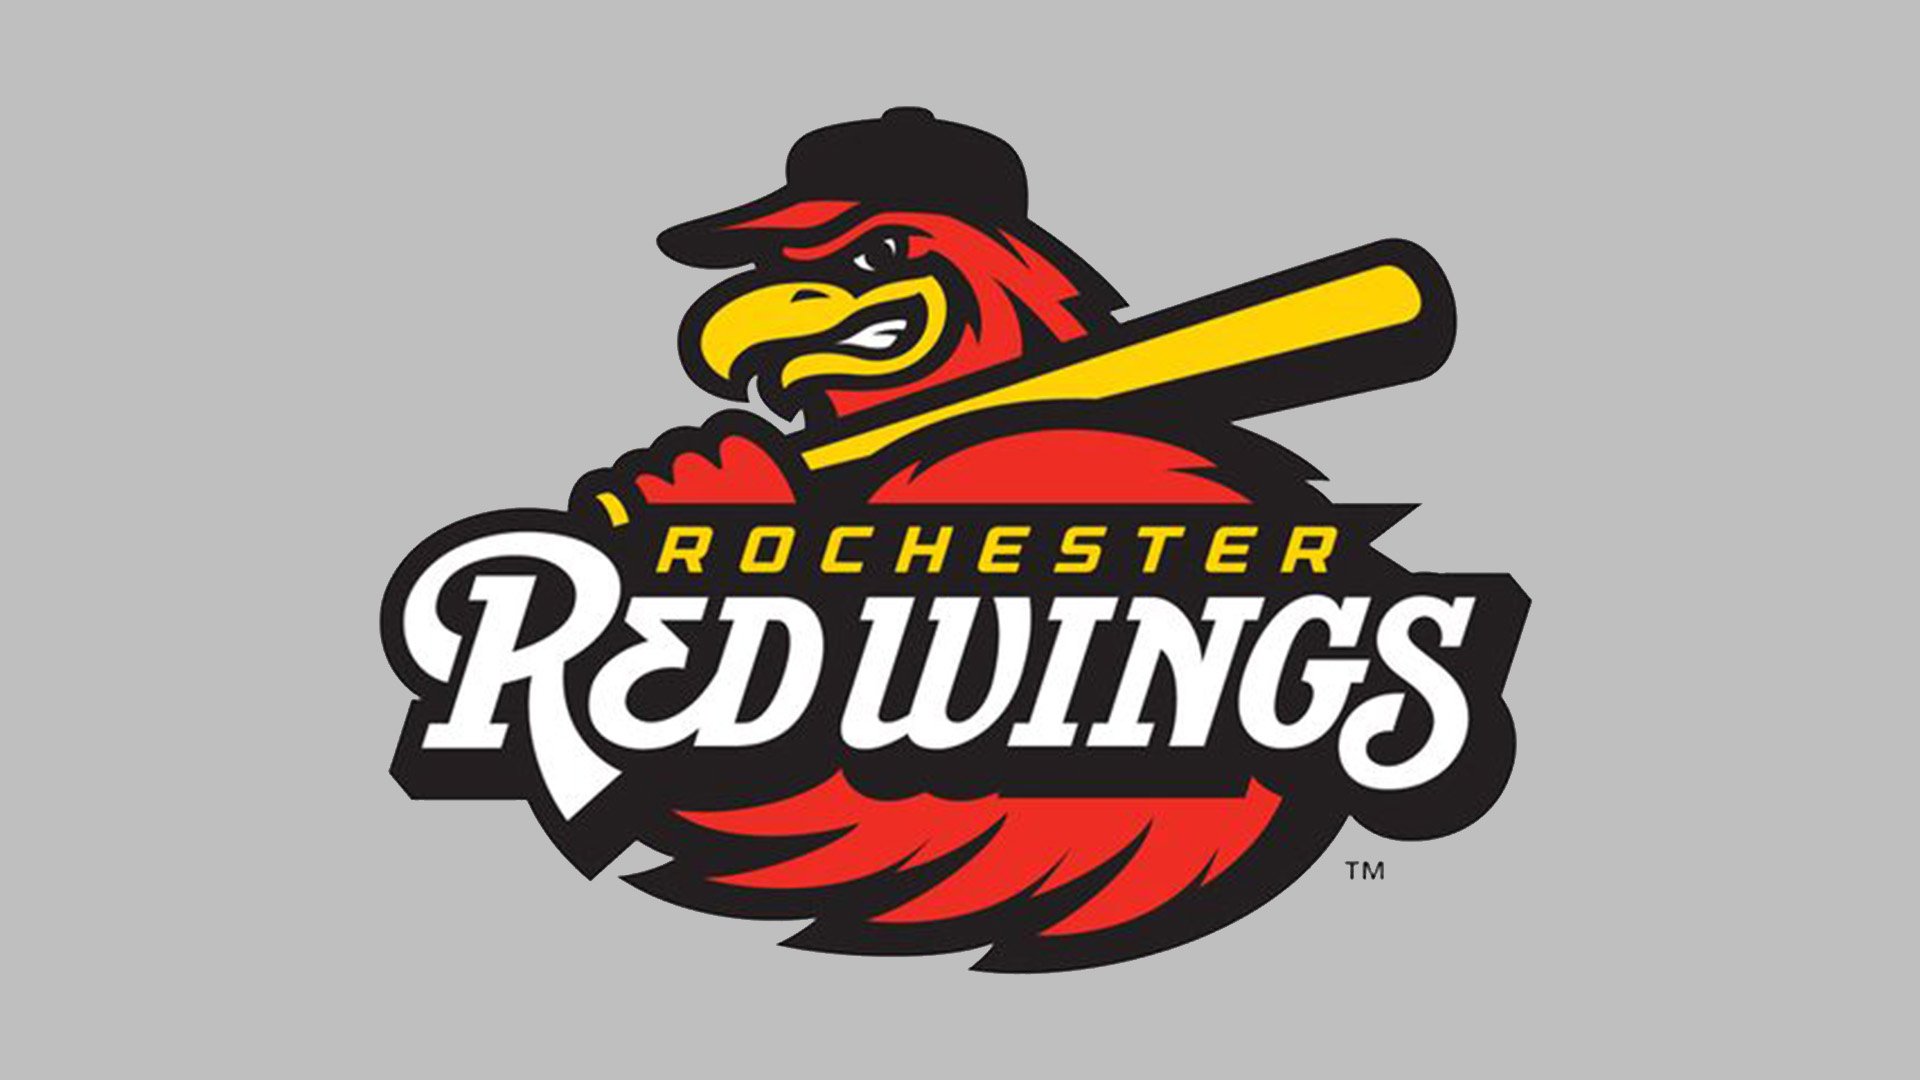 Rochester Red Wings fall to IronPigs in series finale